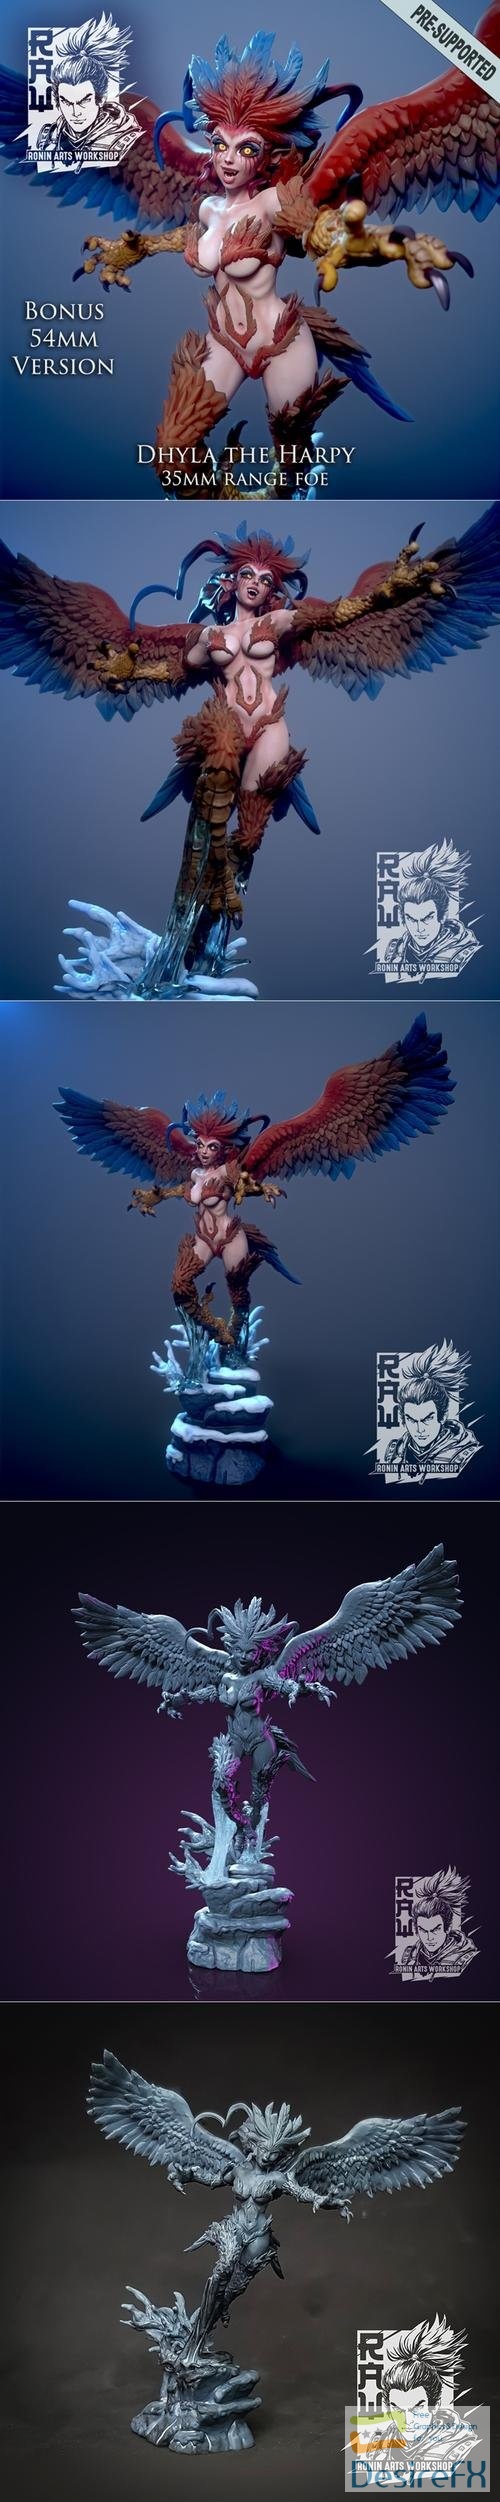 Dhyla The Harpy – 3D Print